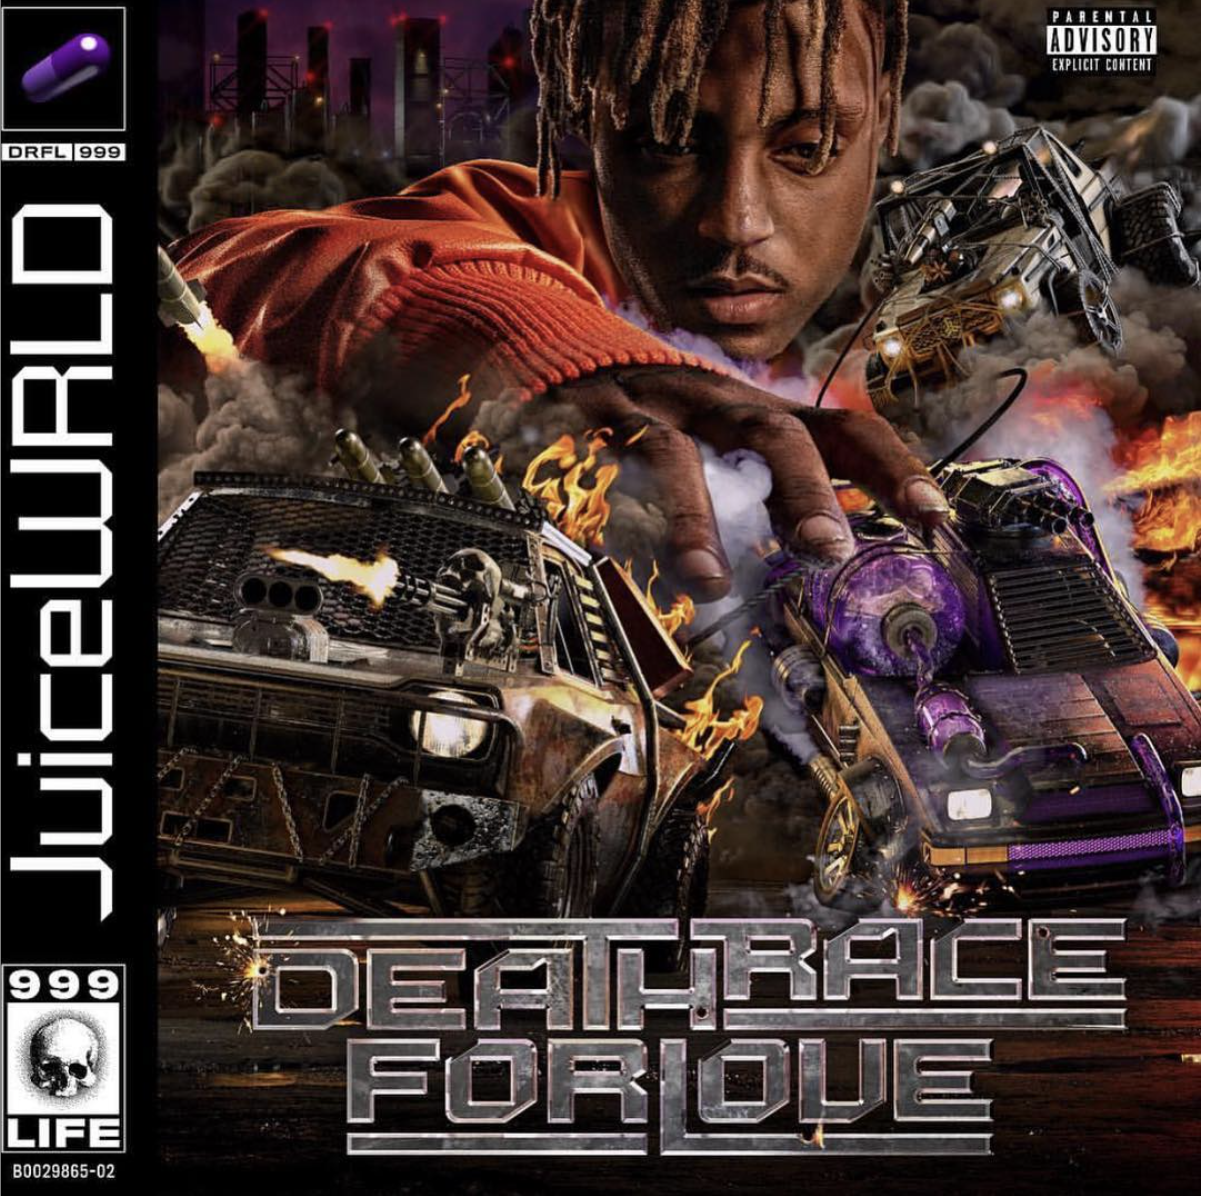 Juice WRLD Drops “A Deathrace for Love” feat. Young Thug & More! [LISTEN]